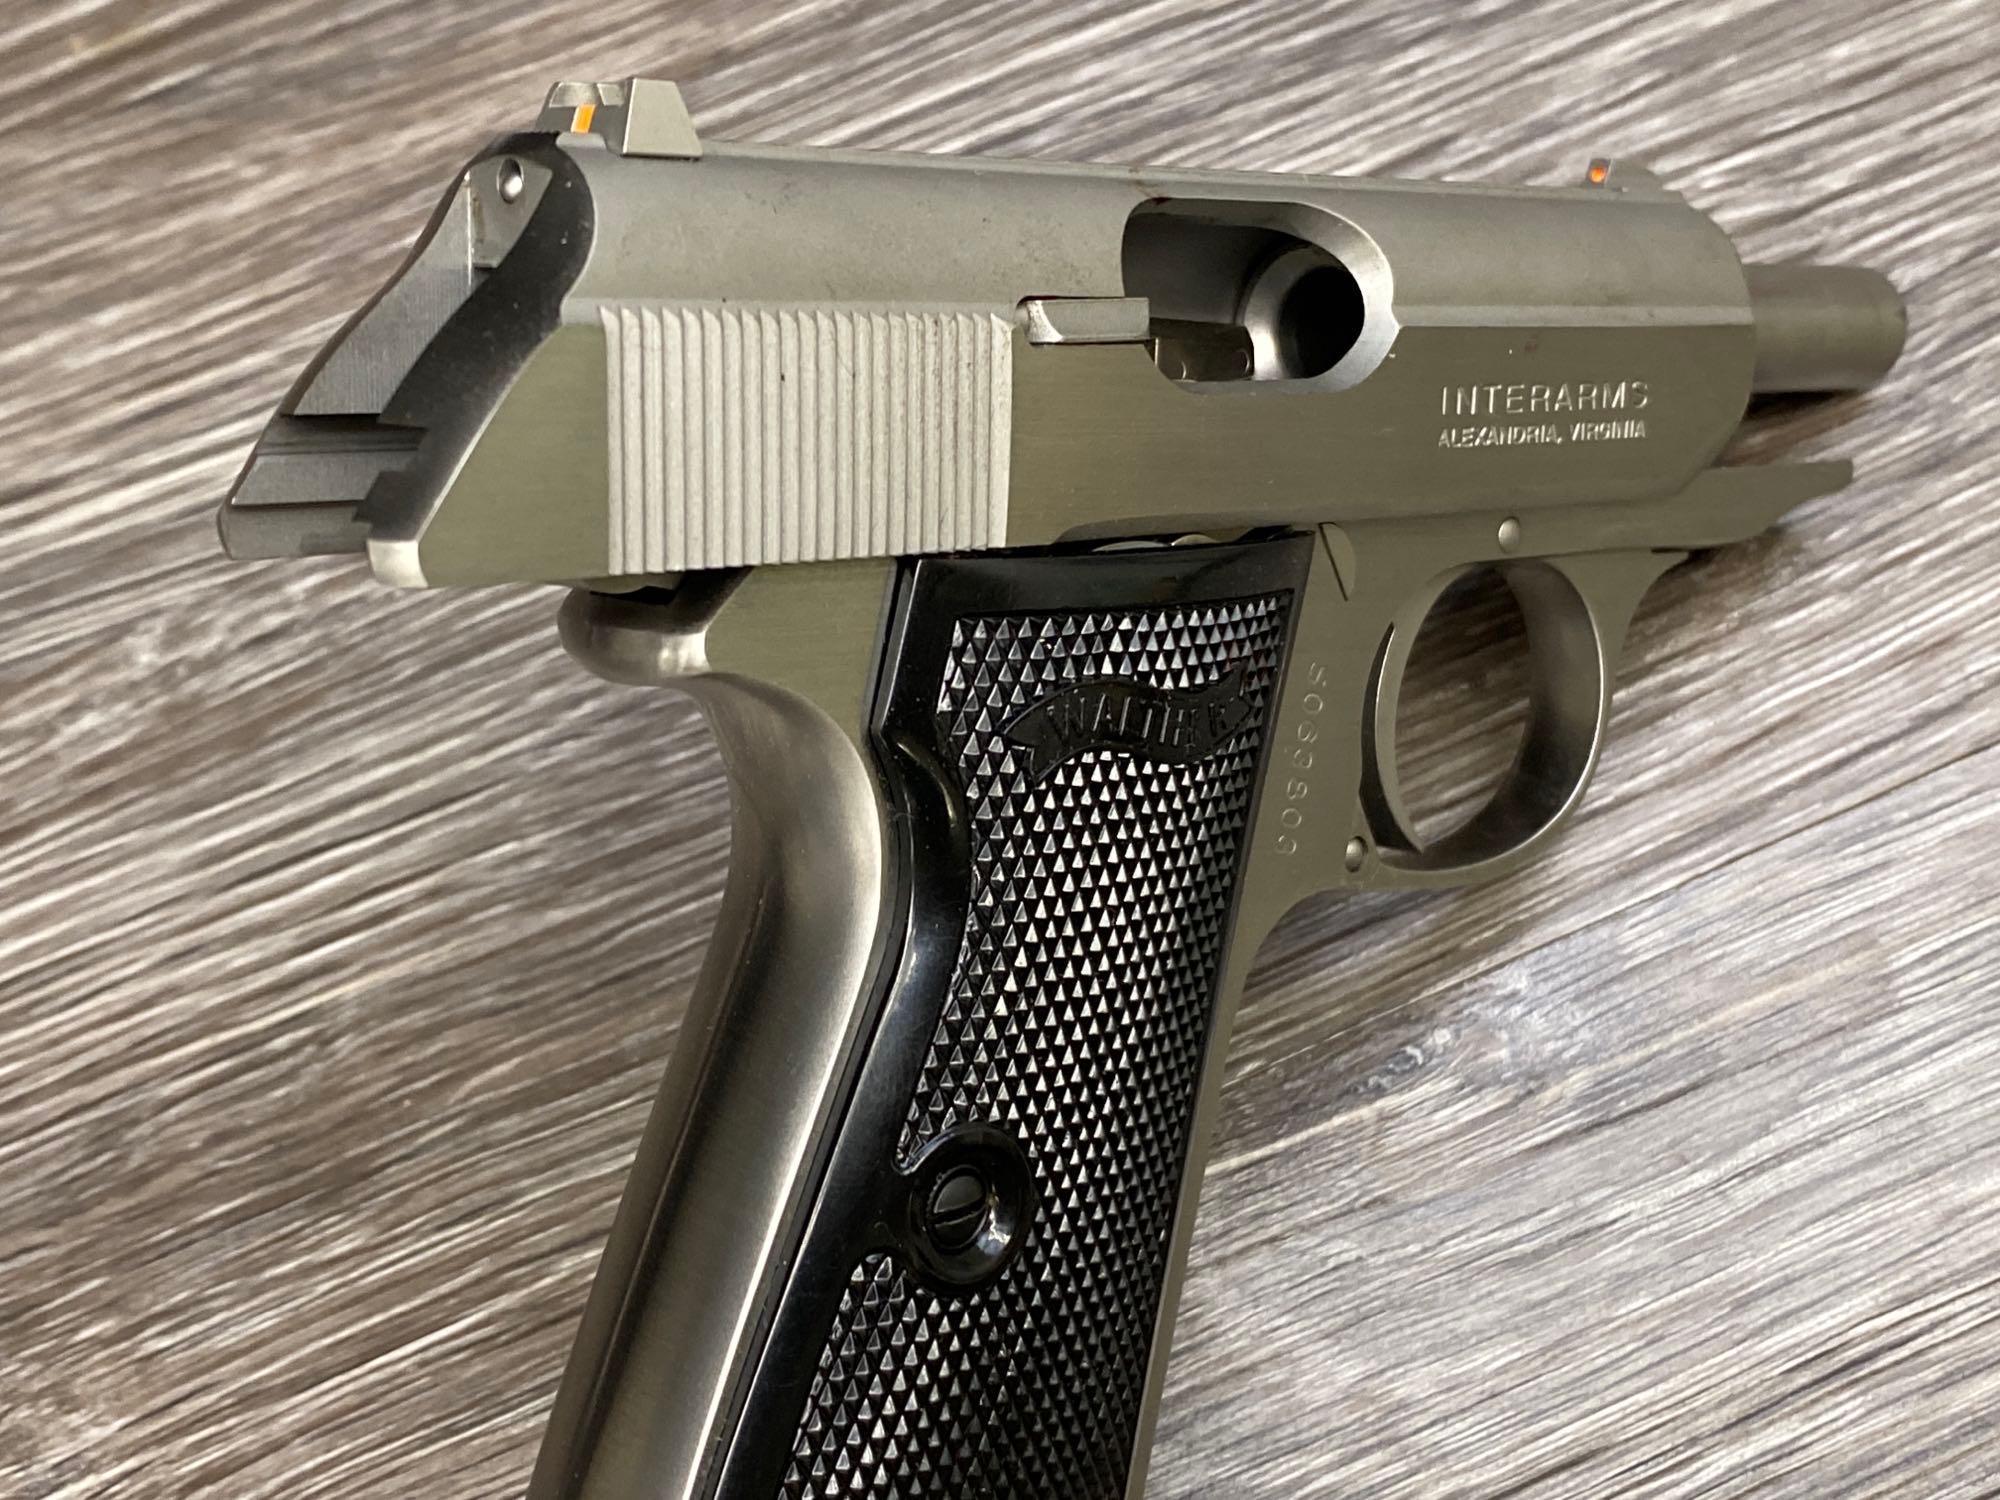 BOXED WALTHER PPK/S STAINLESS STEEL .380 ACP SEMI-AUTO PISTOL